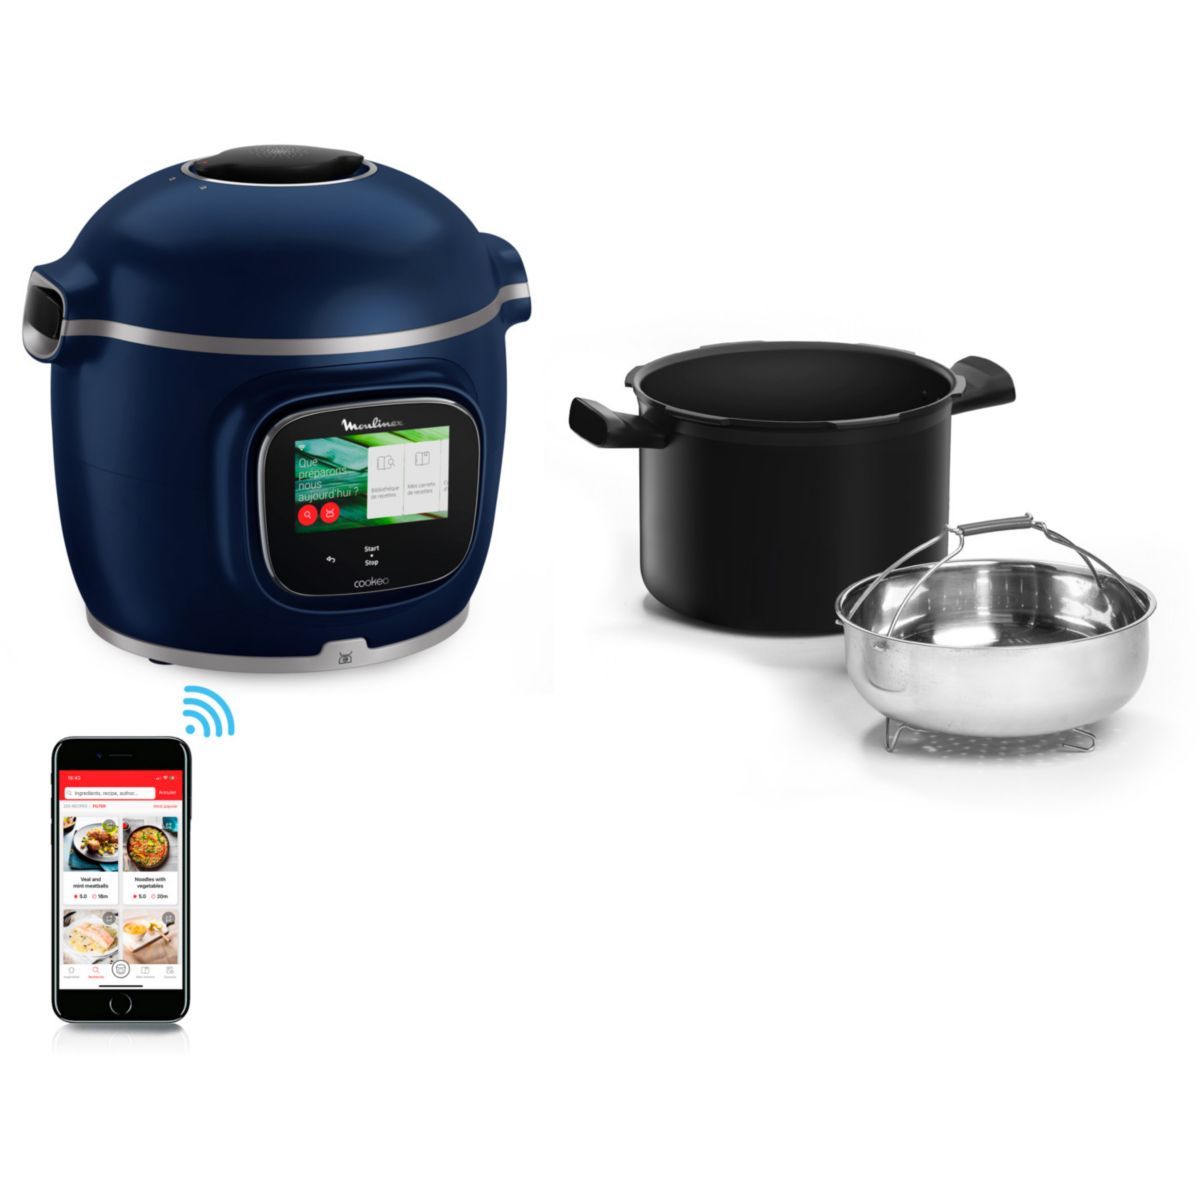 Cookeo cookeo touch wifi pro bleu ce943410 Moulinex